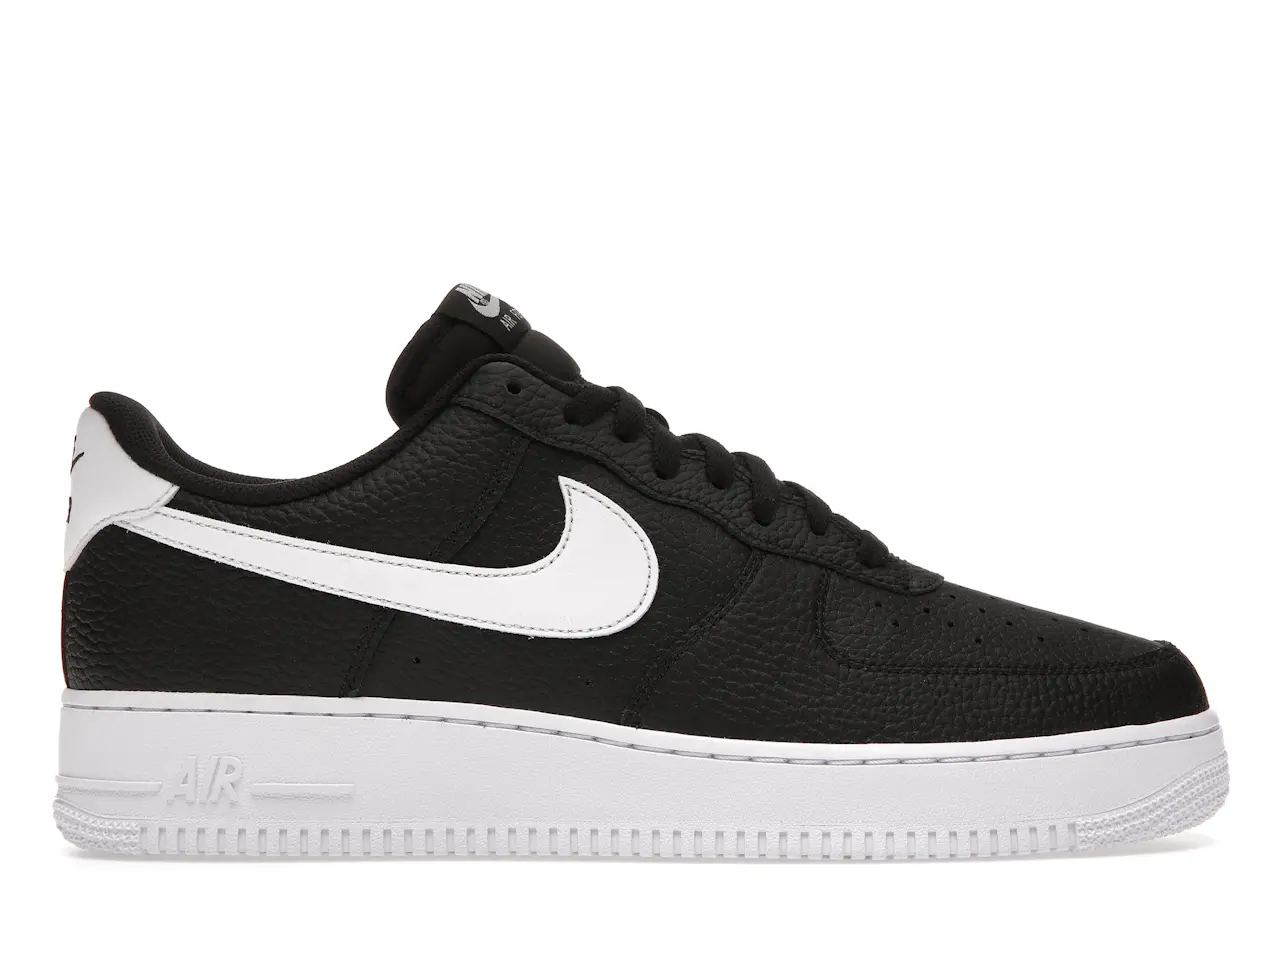 Nike Air Force 1 Low '07 Black White Pebbled Leather Men's - CT2302-002 ...